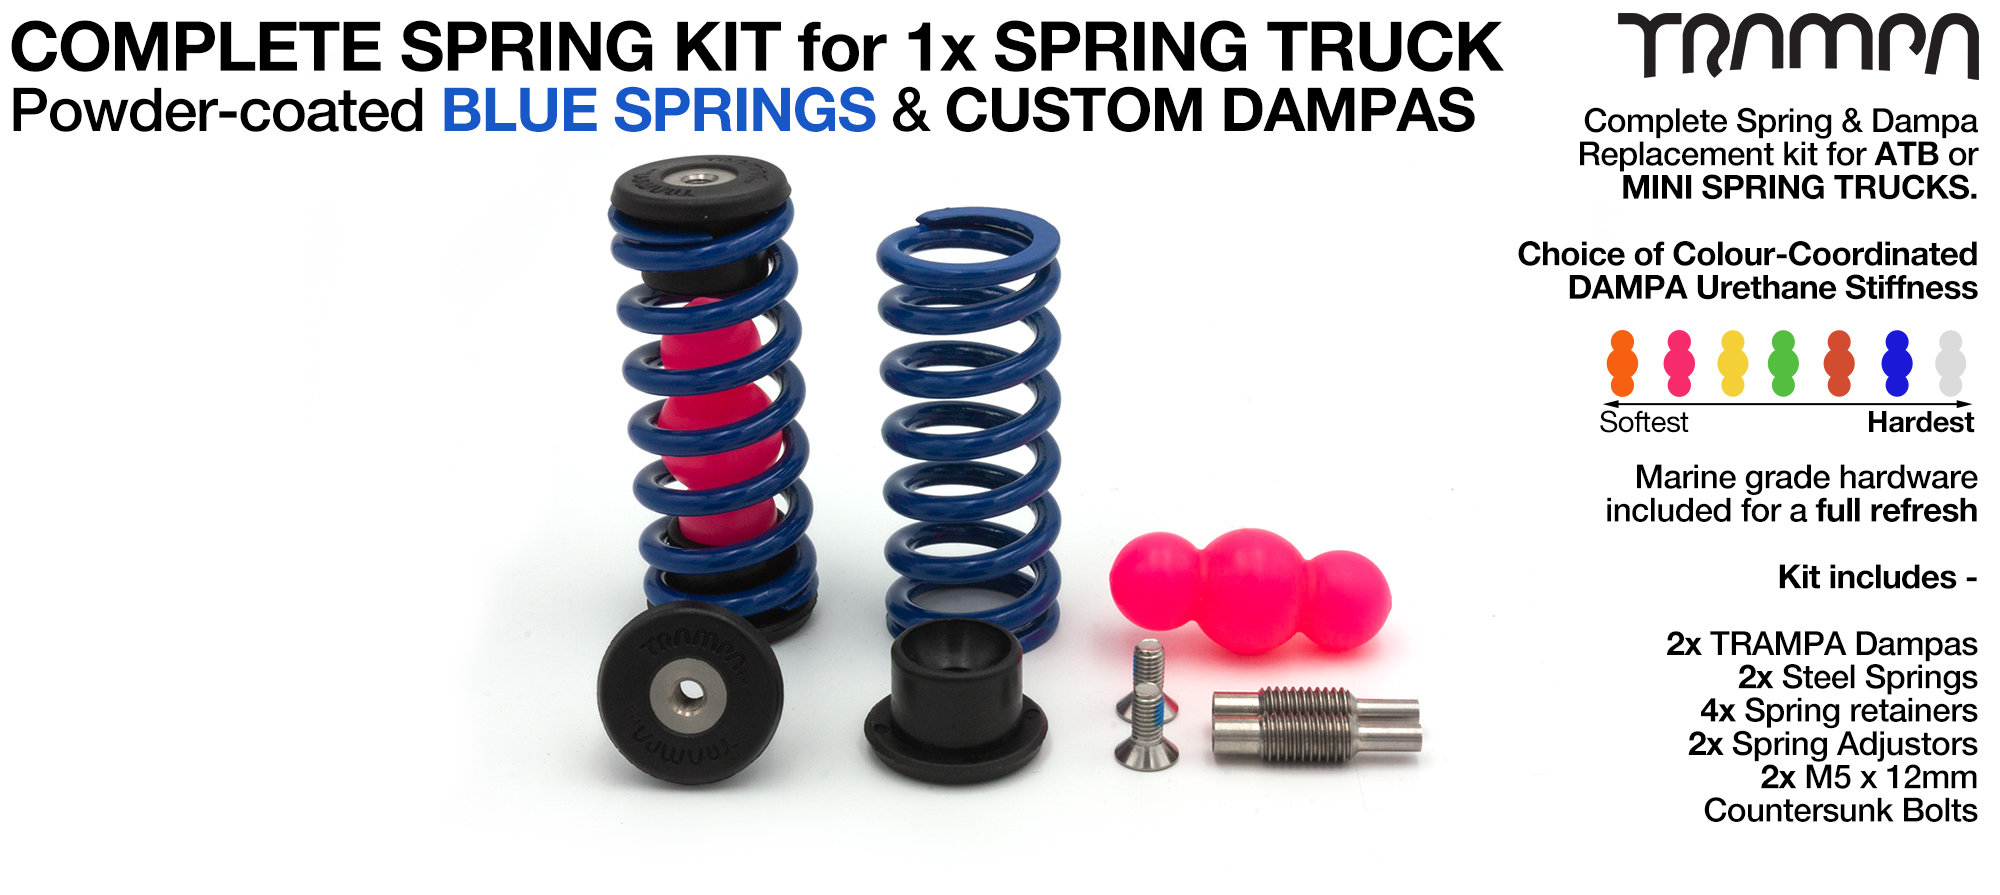 Spring kit Complete for 1x Truck - 2x Springs 2x Dampas 4x Spring Retainers 2x Spring Adjuster & 2 M5x12mm Countersunk Bolt 